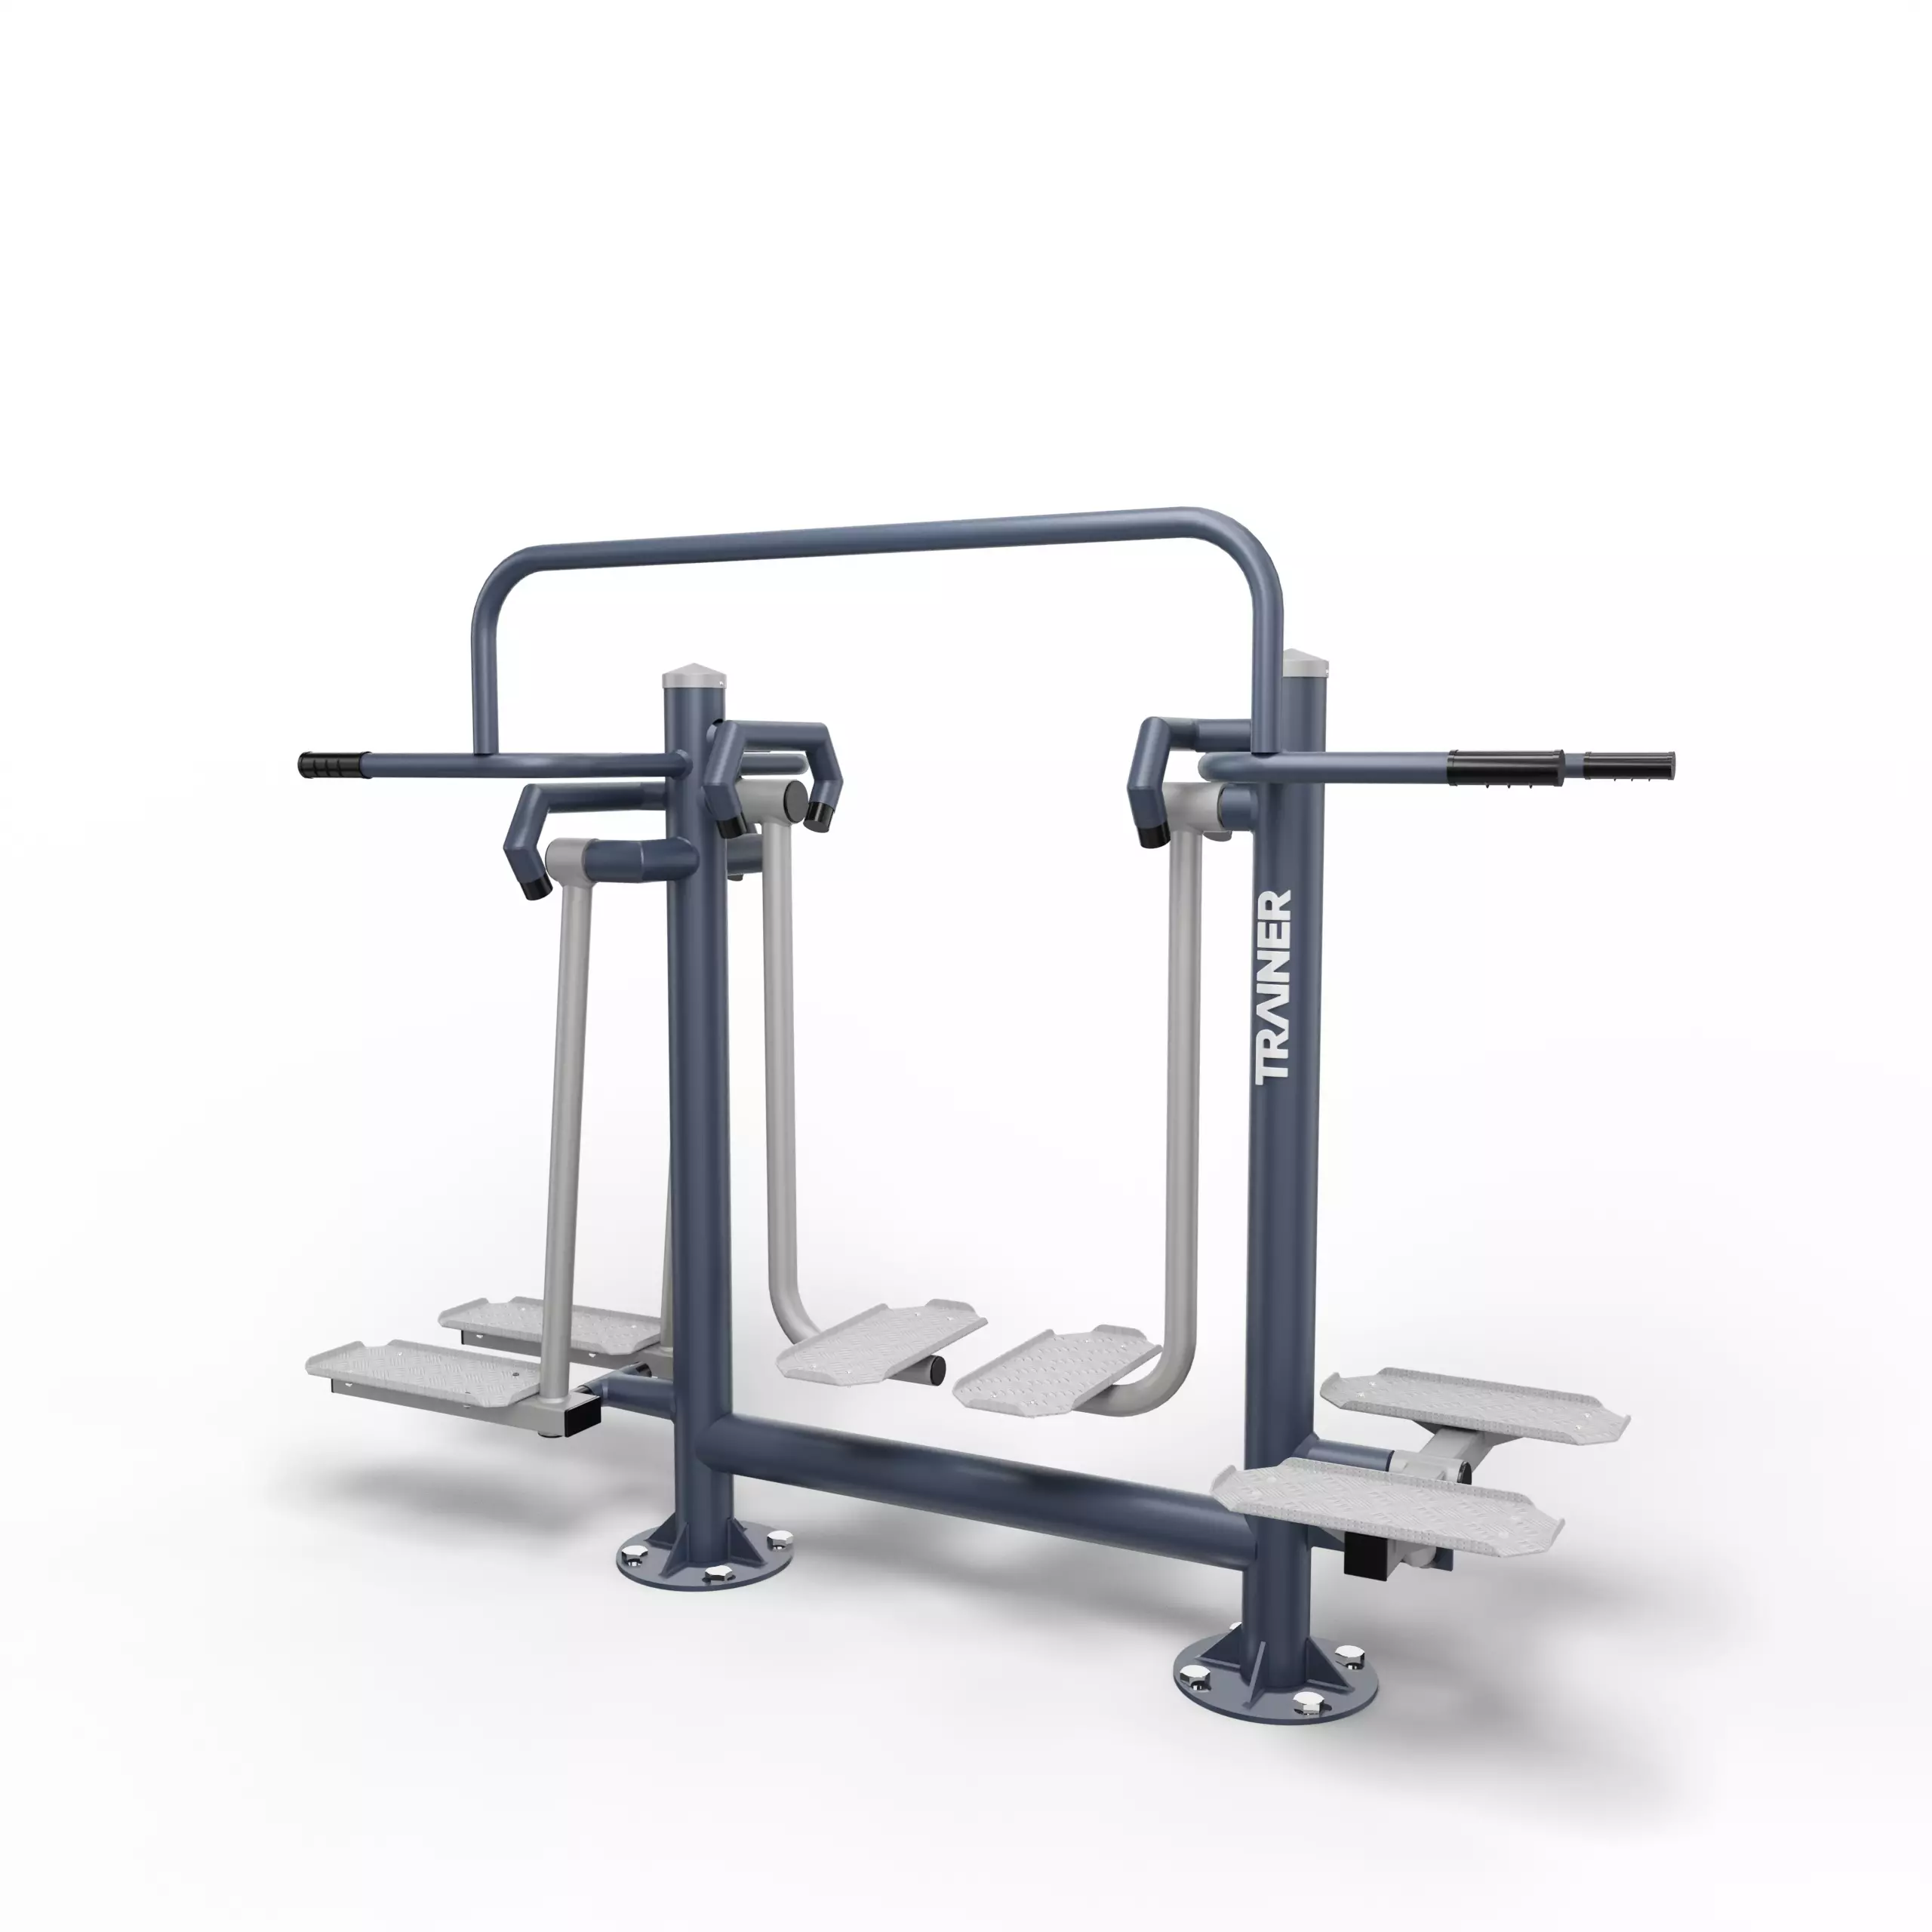 Outdoor gym and outdoor fitness equipment